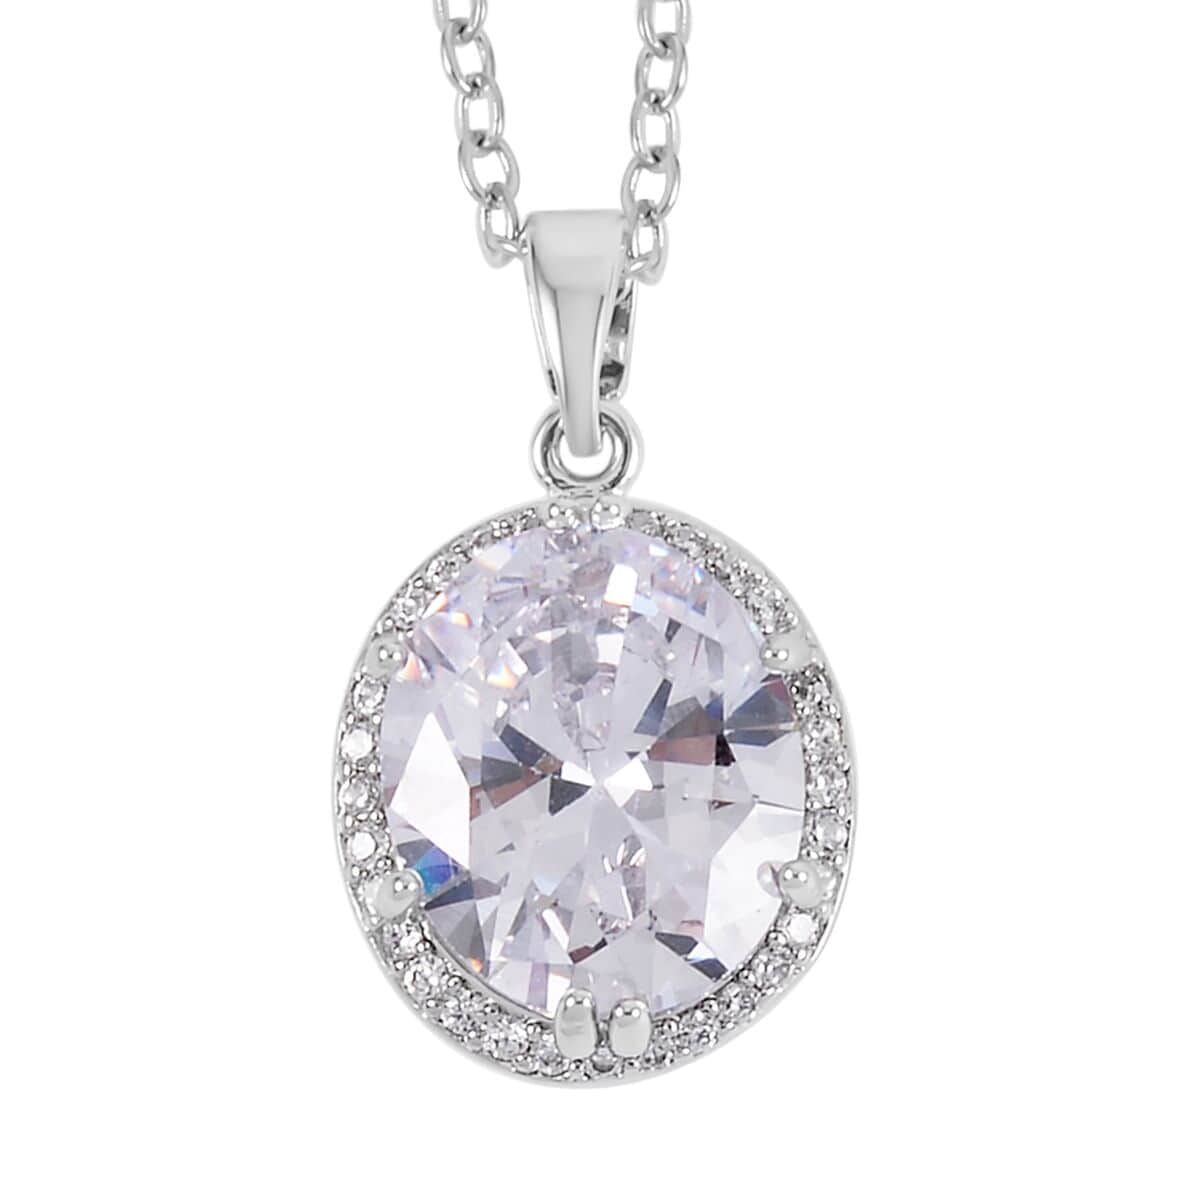 Simulated White Diamond Earrings, Halo Ring (Size 7.0) and Pendant Necklace in Silvertone 20-22 Inches image number 5